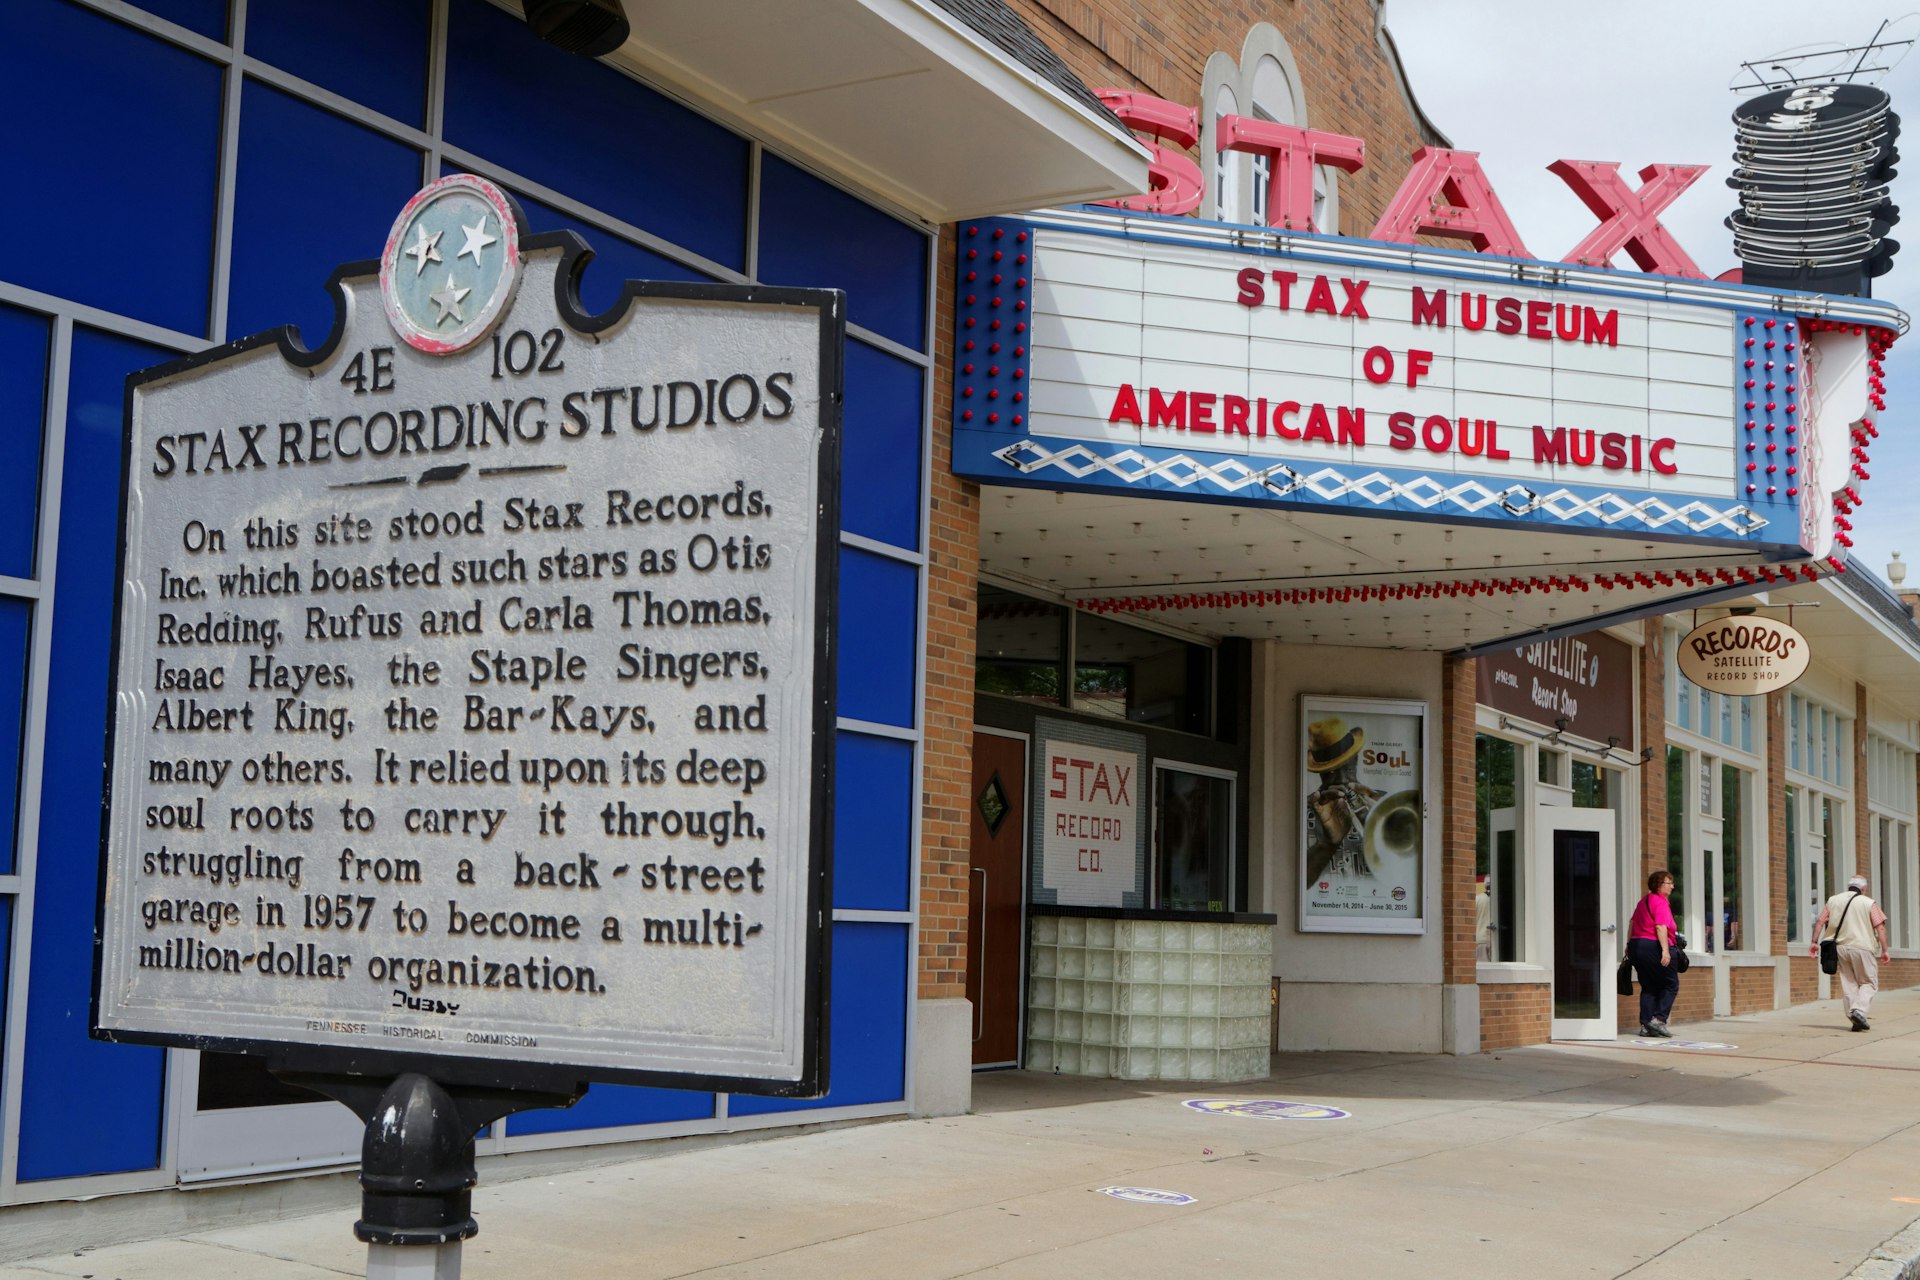 The Stax Museum of American Soul Music occupies the site of Stax Studio, Memphis, Tennesee, USA